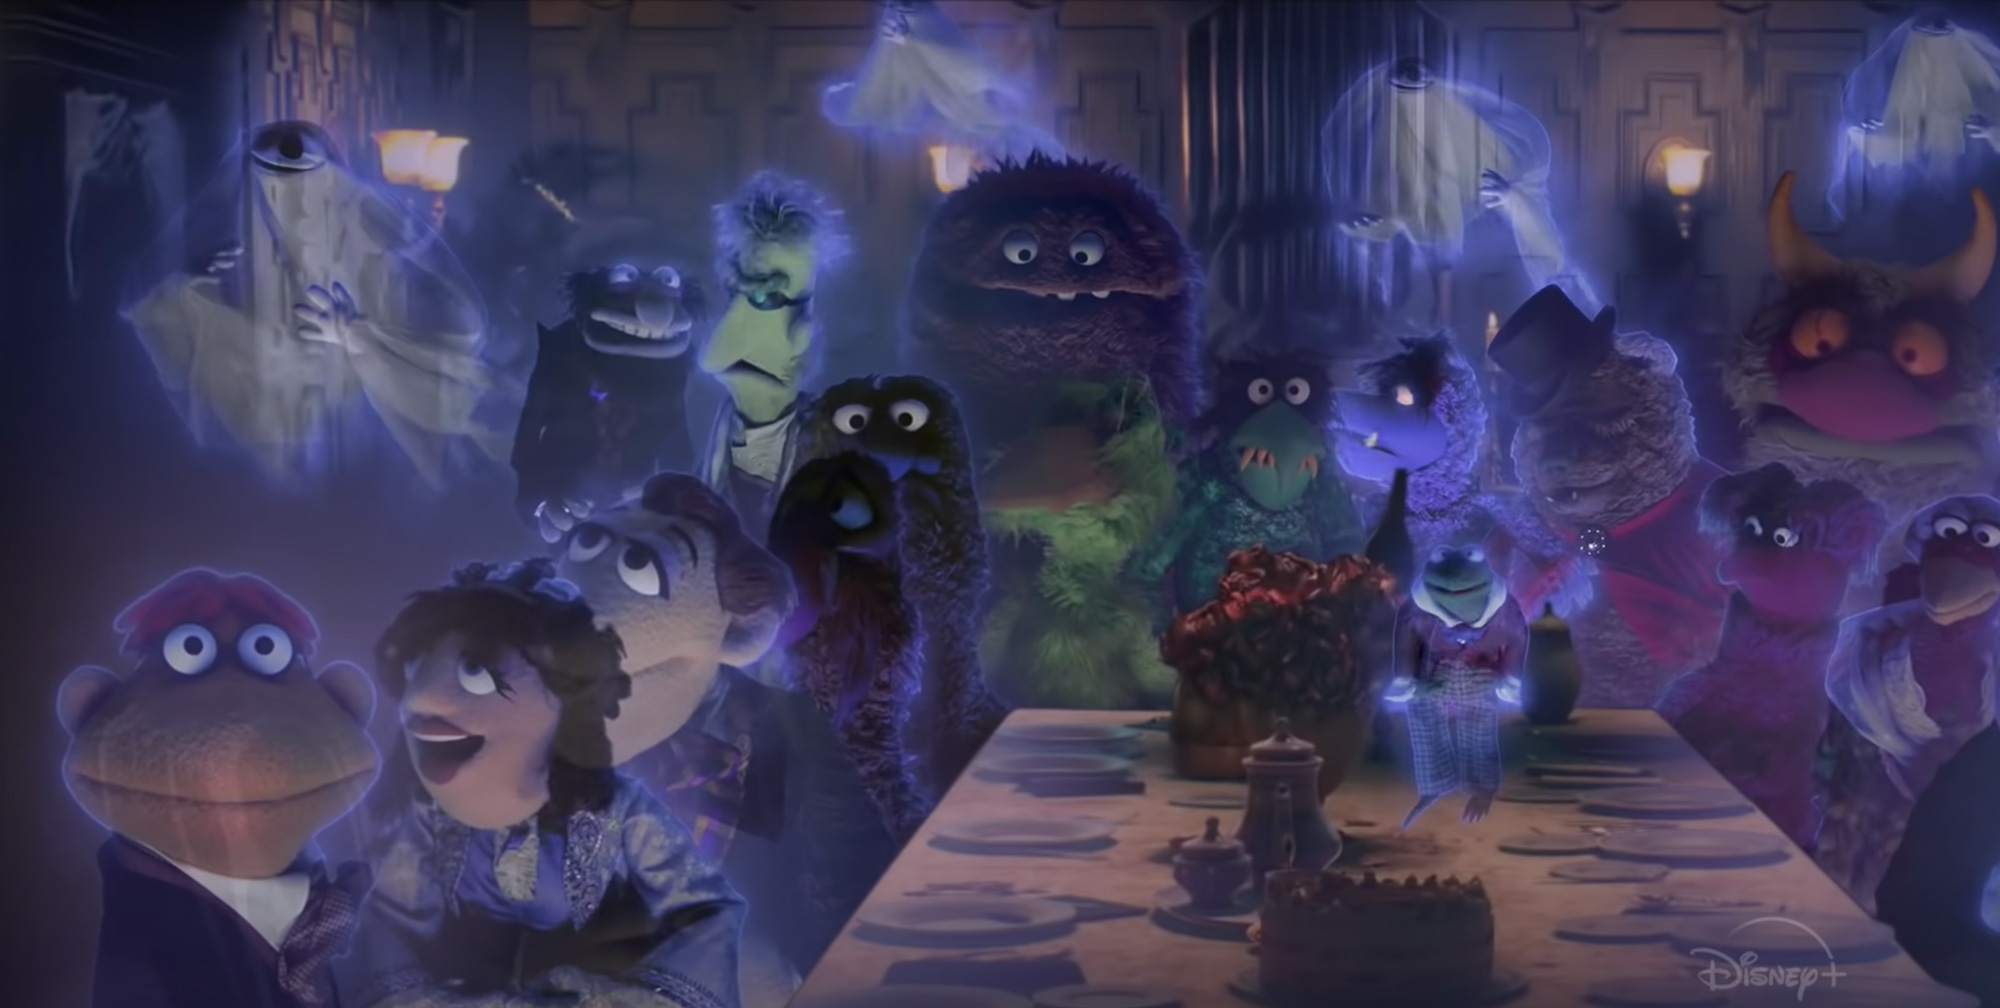 Dinner scene of Muppets Haunted Mansion.